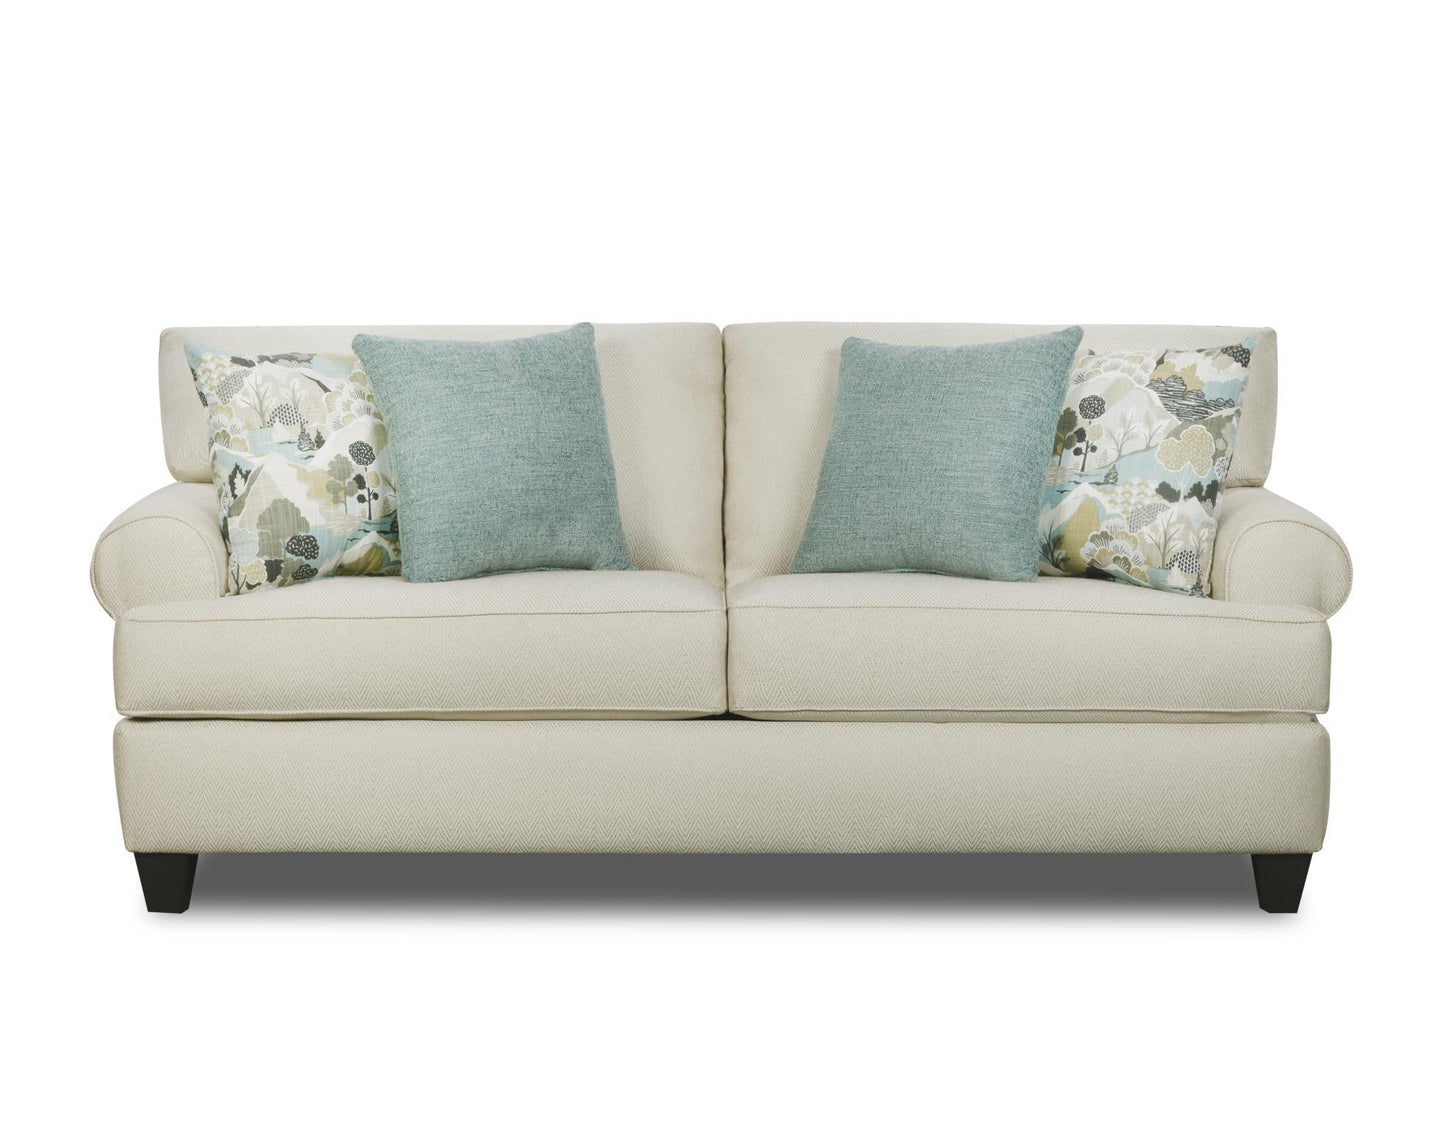 WEEKLY or MONTHLY. Madonna Ocean Teal Feel Couch & Loveseat